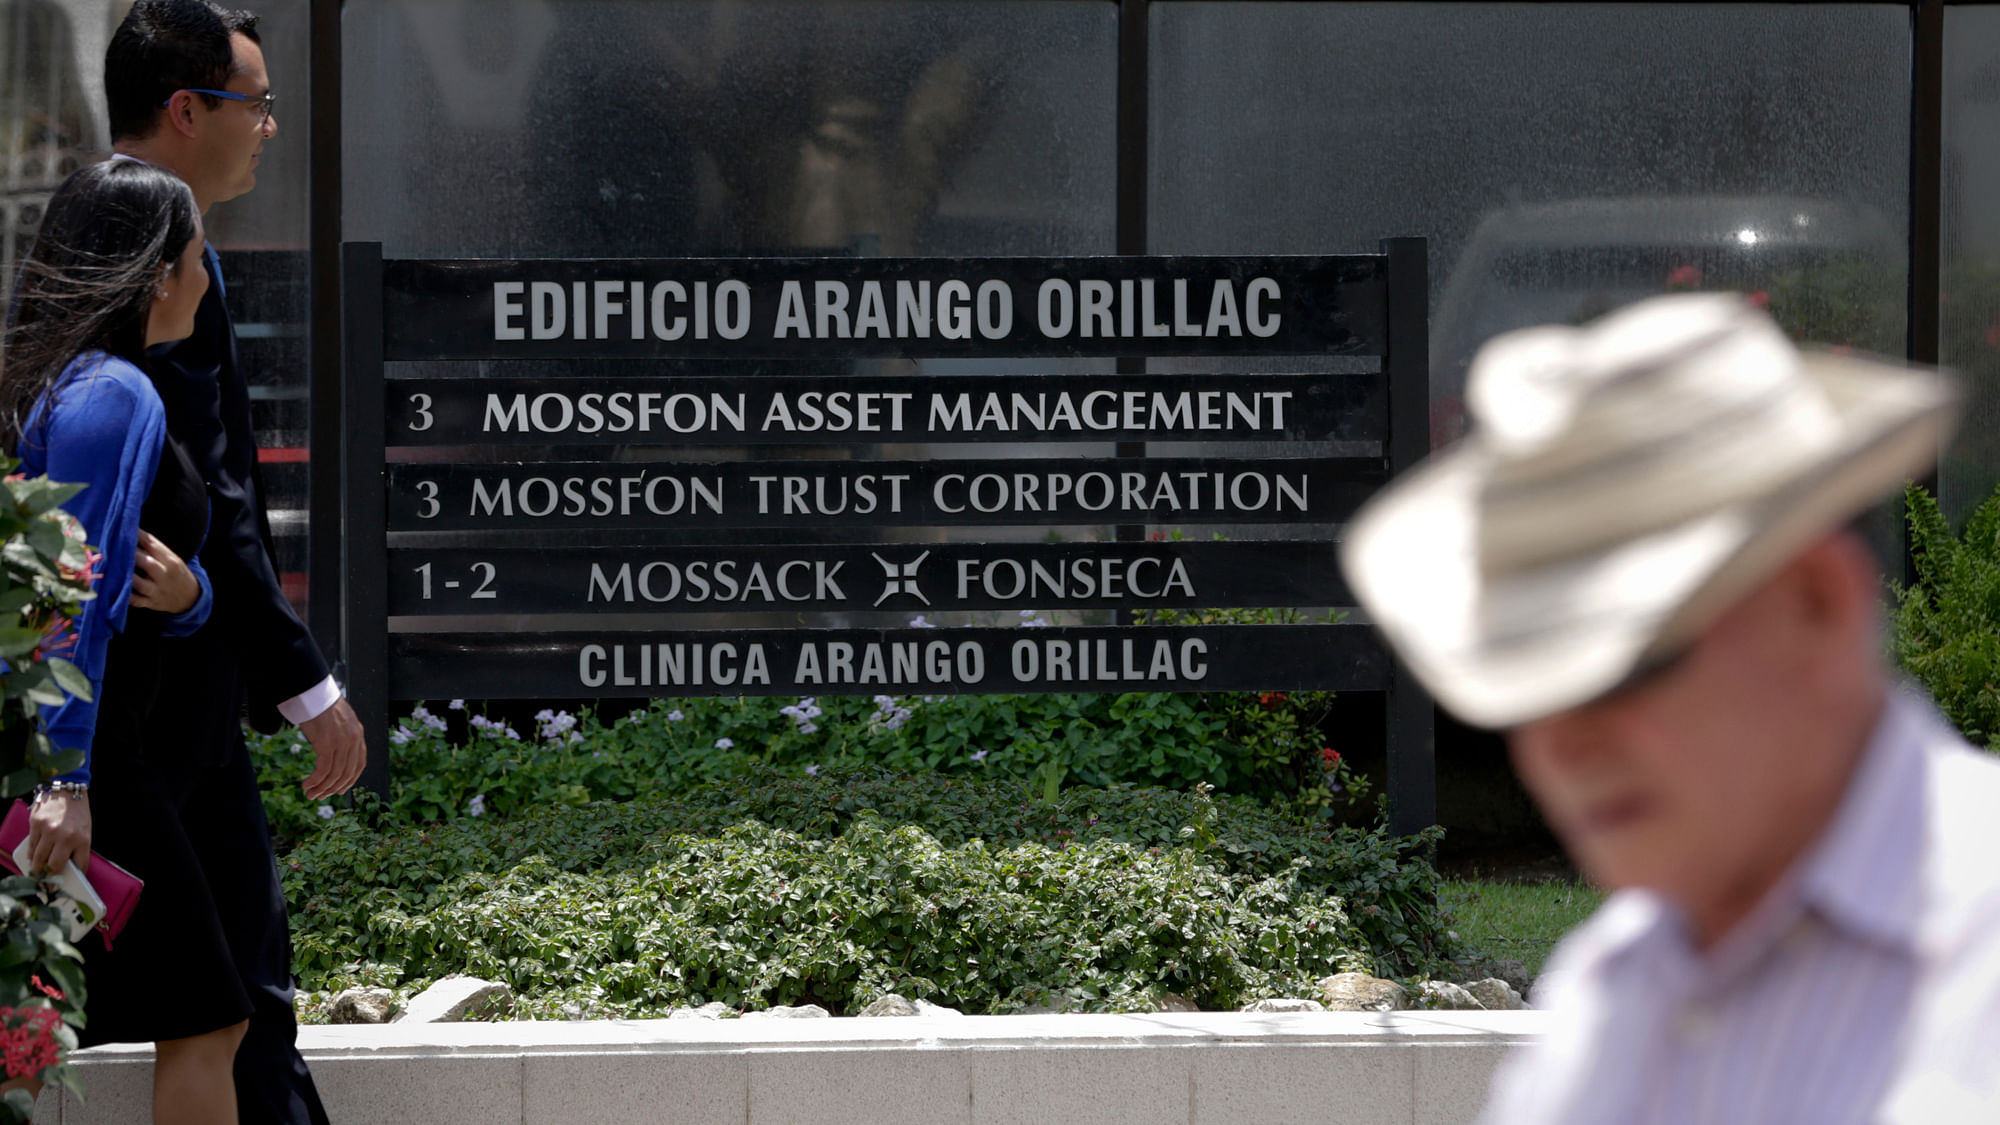 People walk past the Arango Orillac Building which lists the Mossack Fonseca law firm in Panama City on Tuesday, 5 April  2016. (Photo: AP)